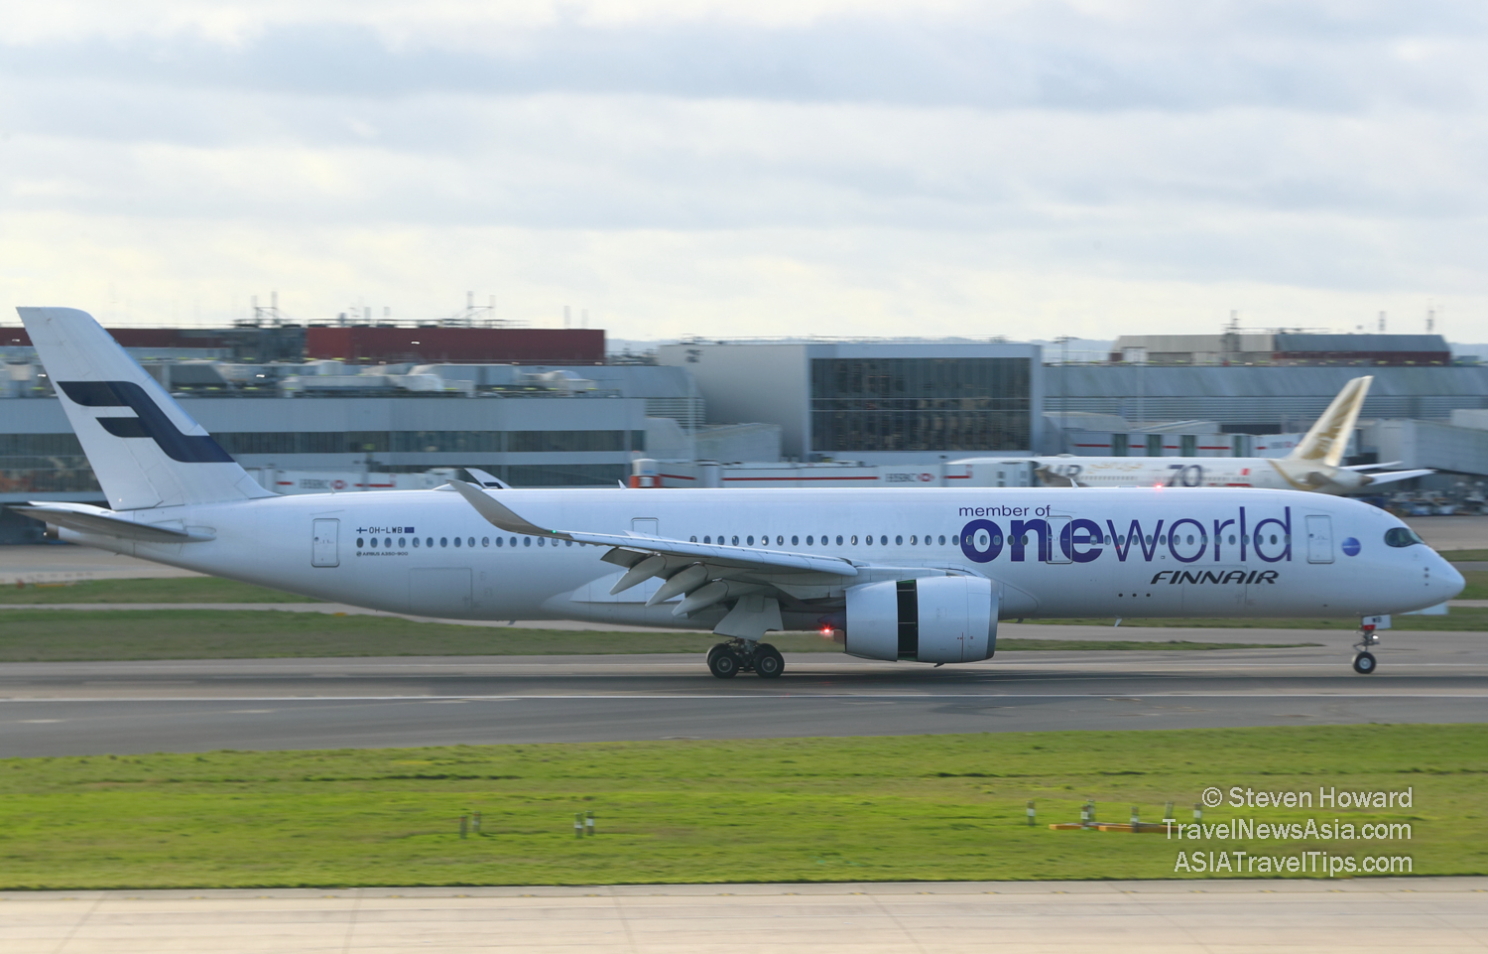 Finnair A350-900 reg: OH-LWB. Picture by Steven Howard of TravelNewsAsia.com Click to enlarge.